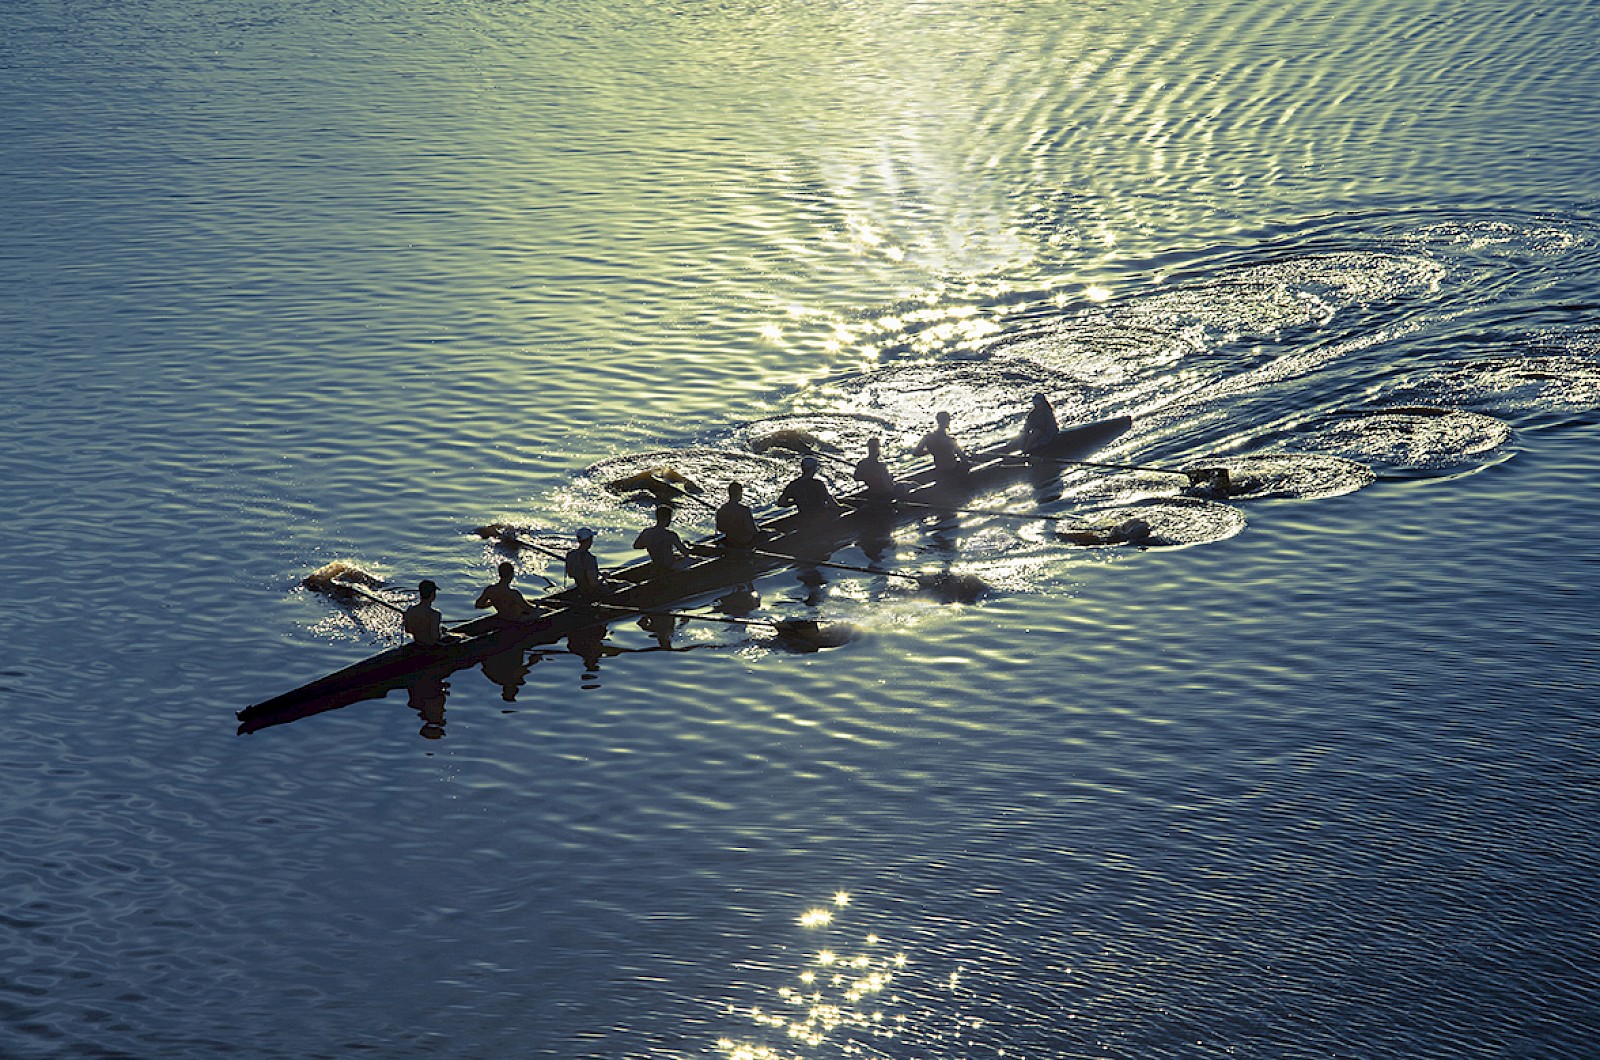 8 rowers in one rowing boat gliding down a river